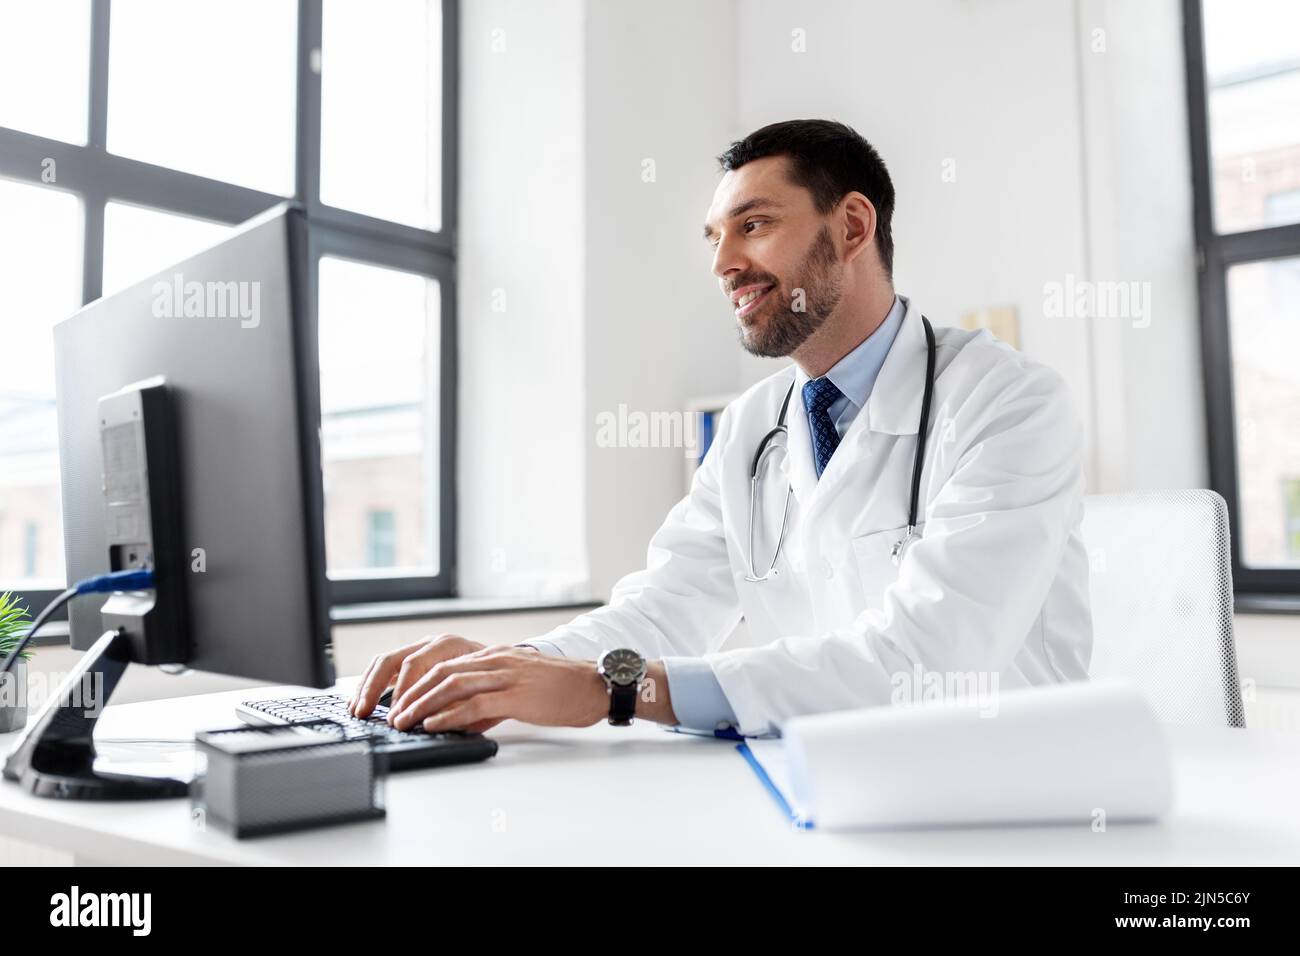 male doctor with computer working at hospital Stock Photo